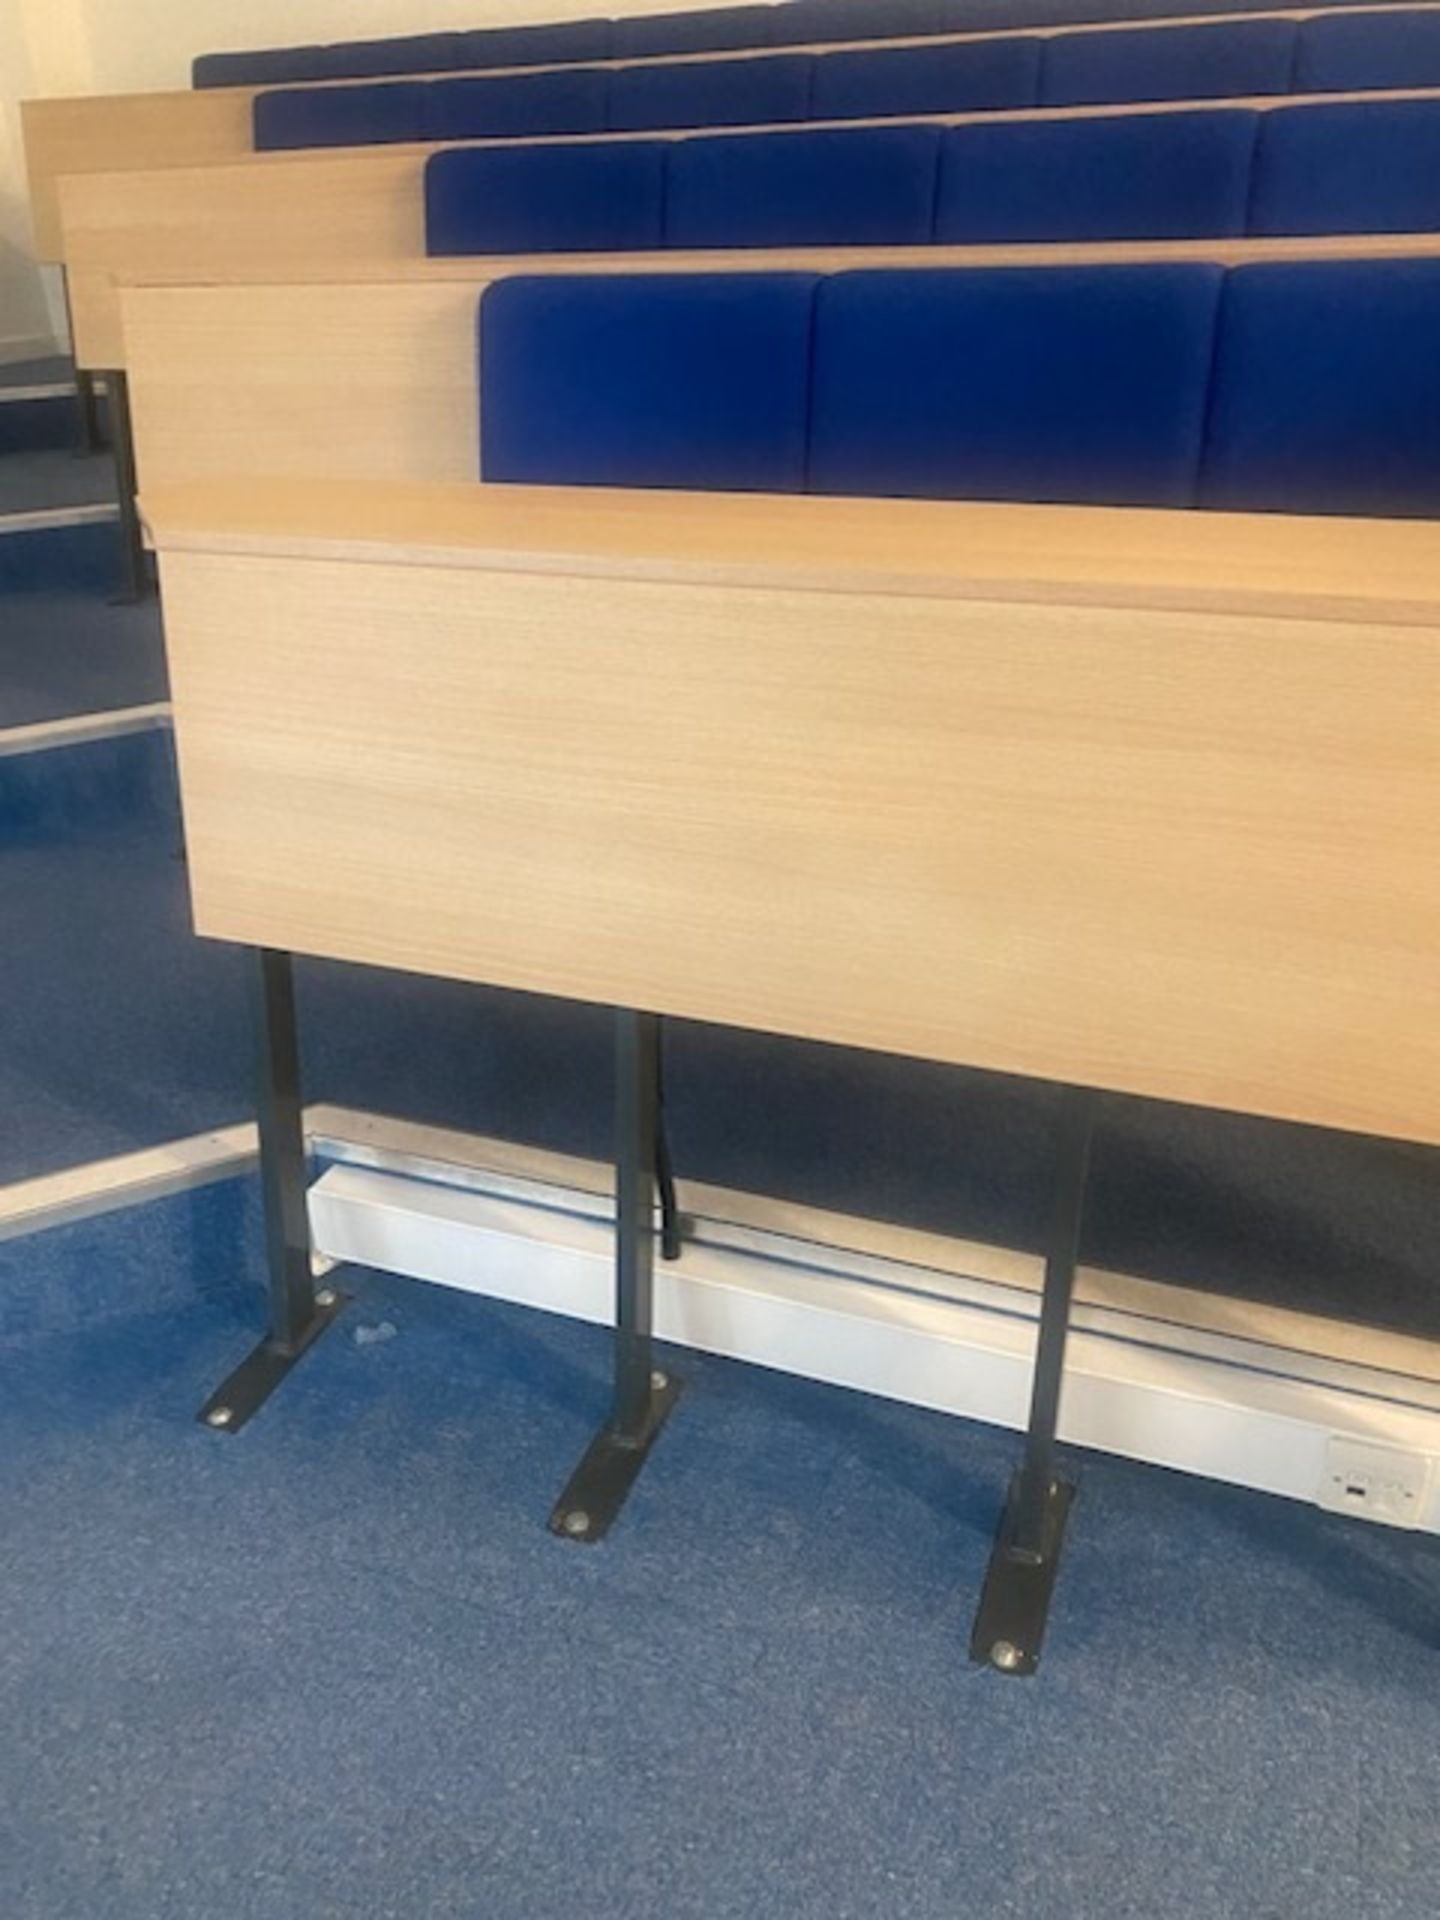 Stage seating With Built In Desks - Image 10 of 10